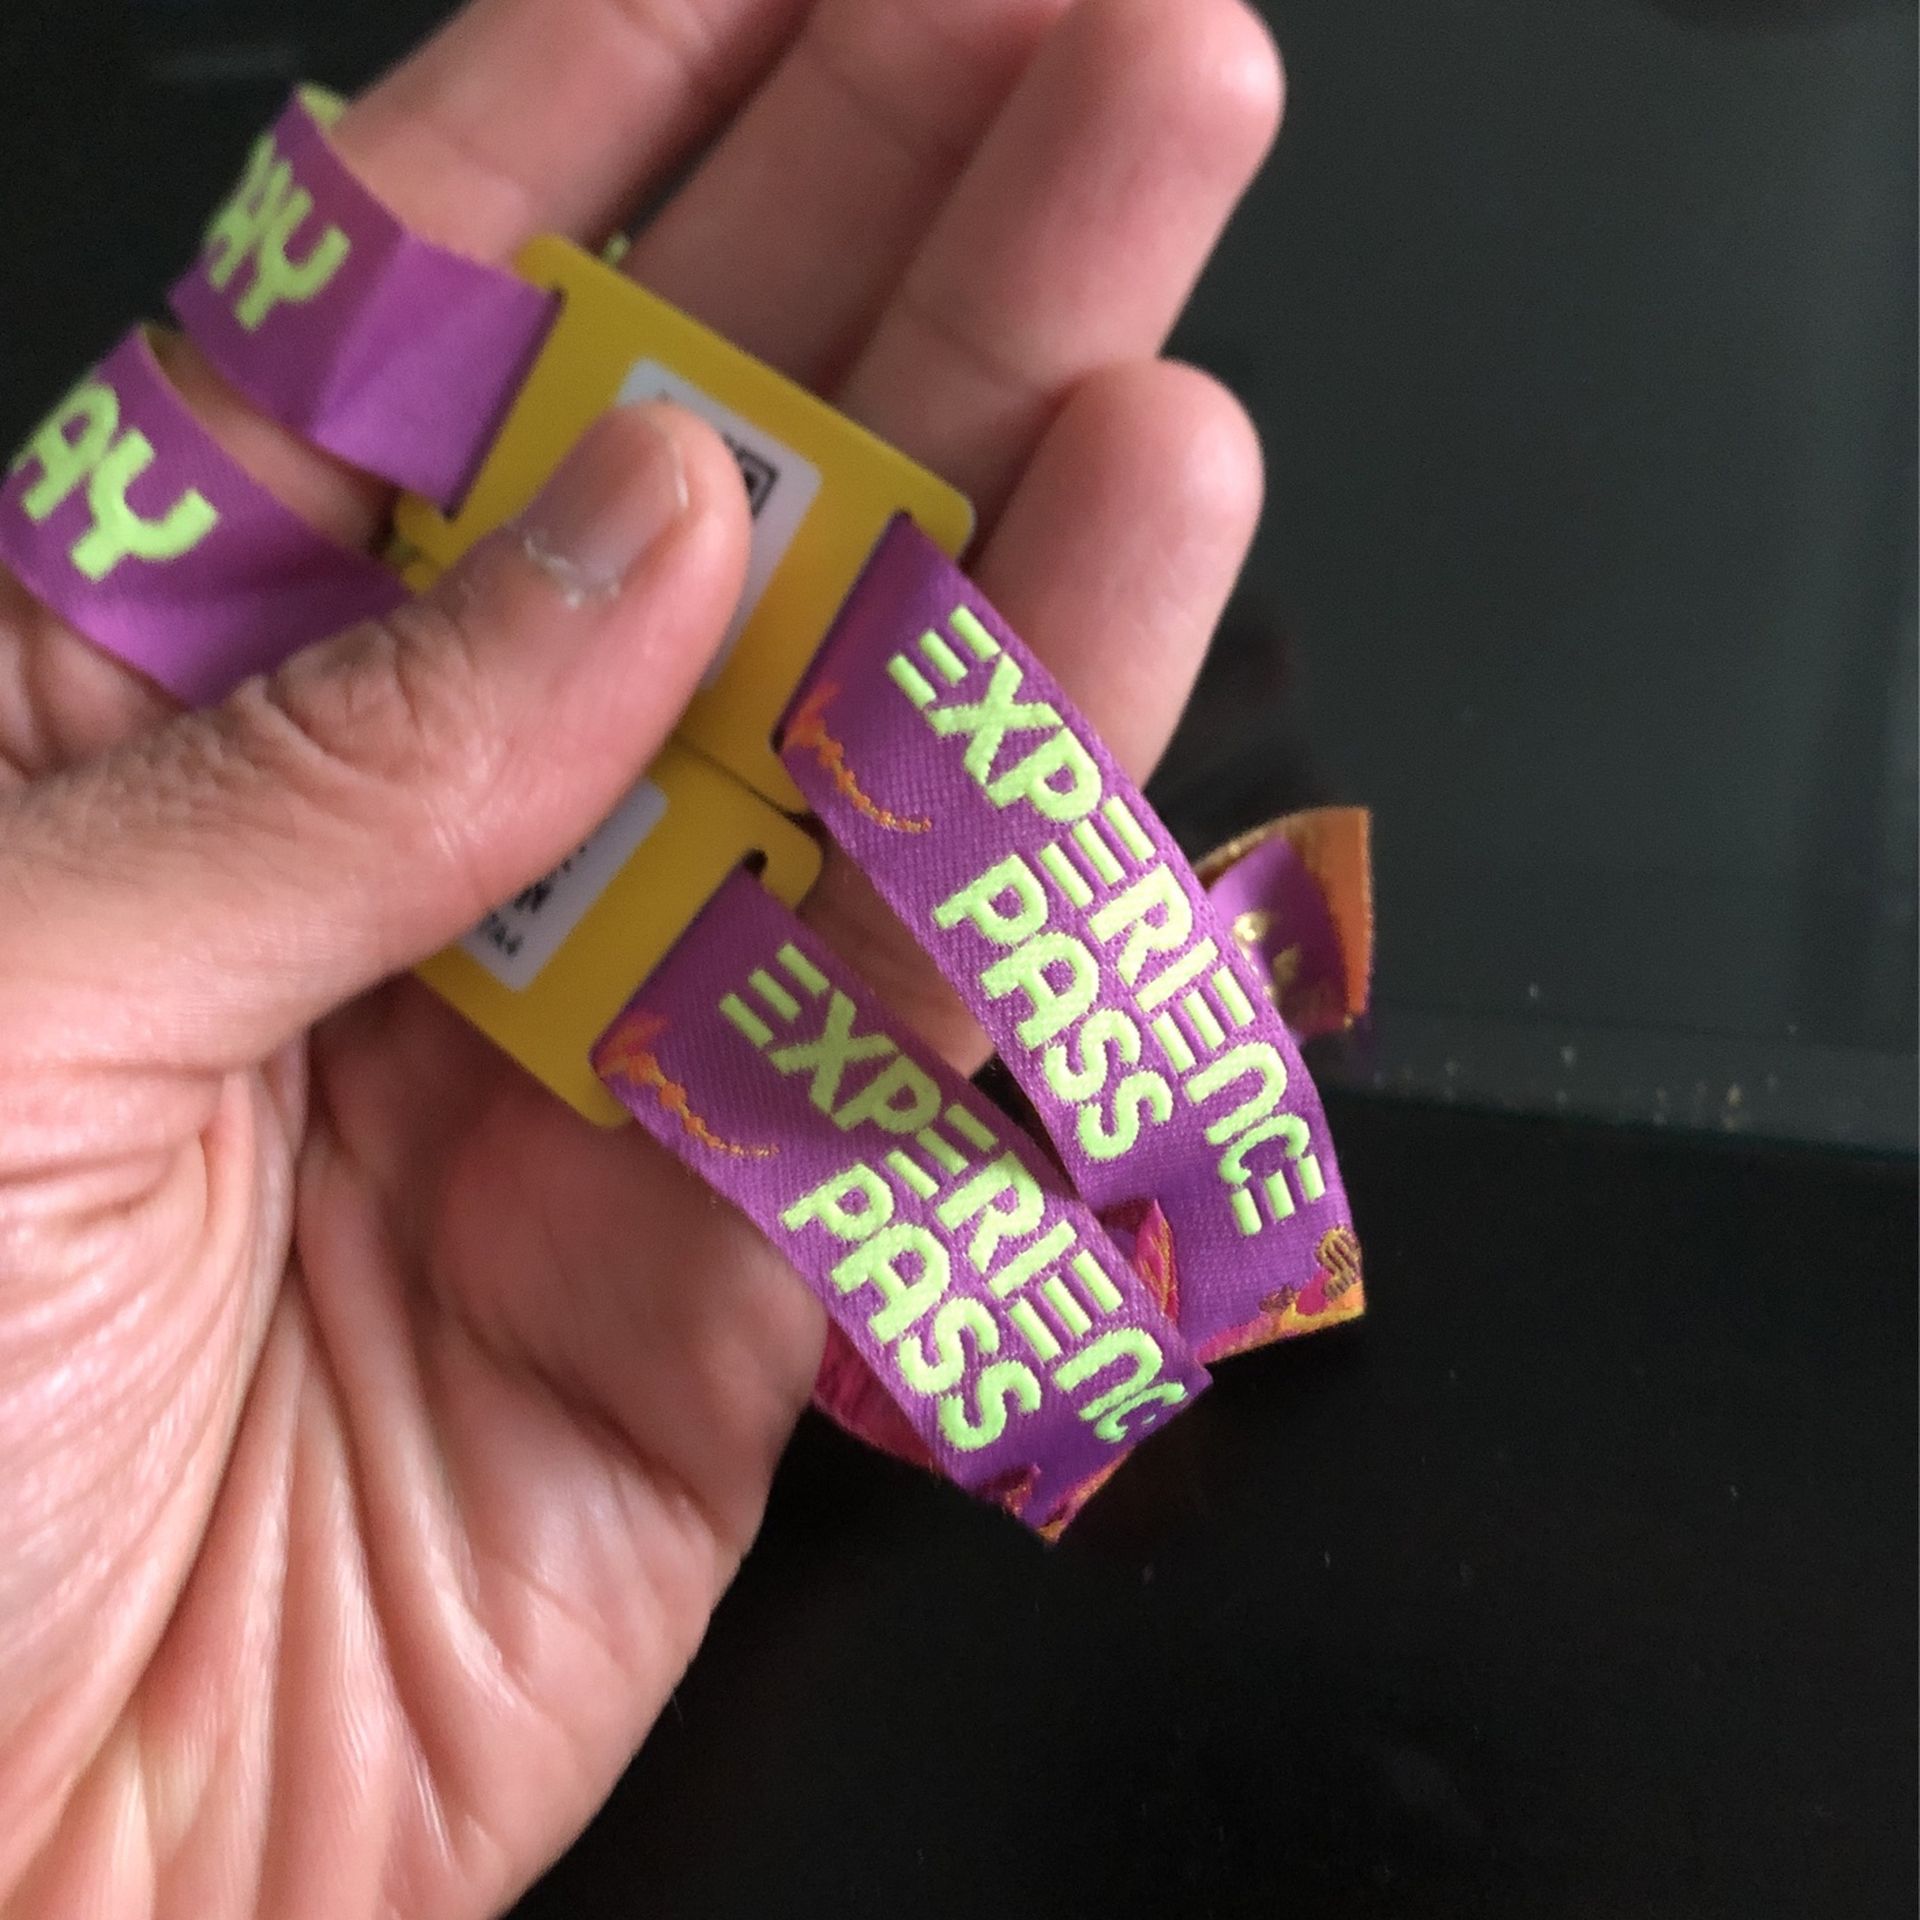 EDC Orlando 3 Day Experience pass X 2 Bands In Hand!